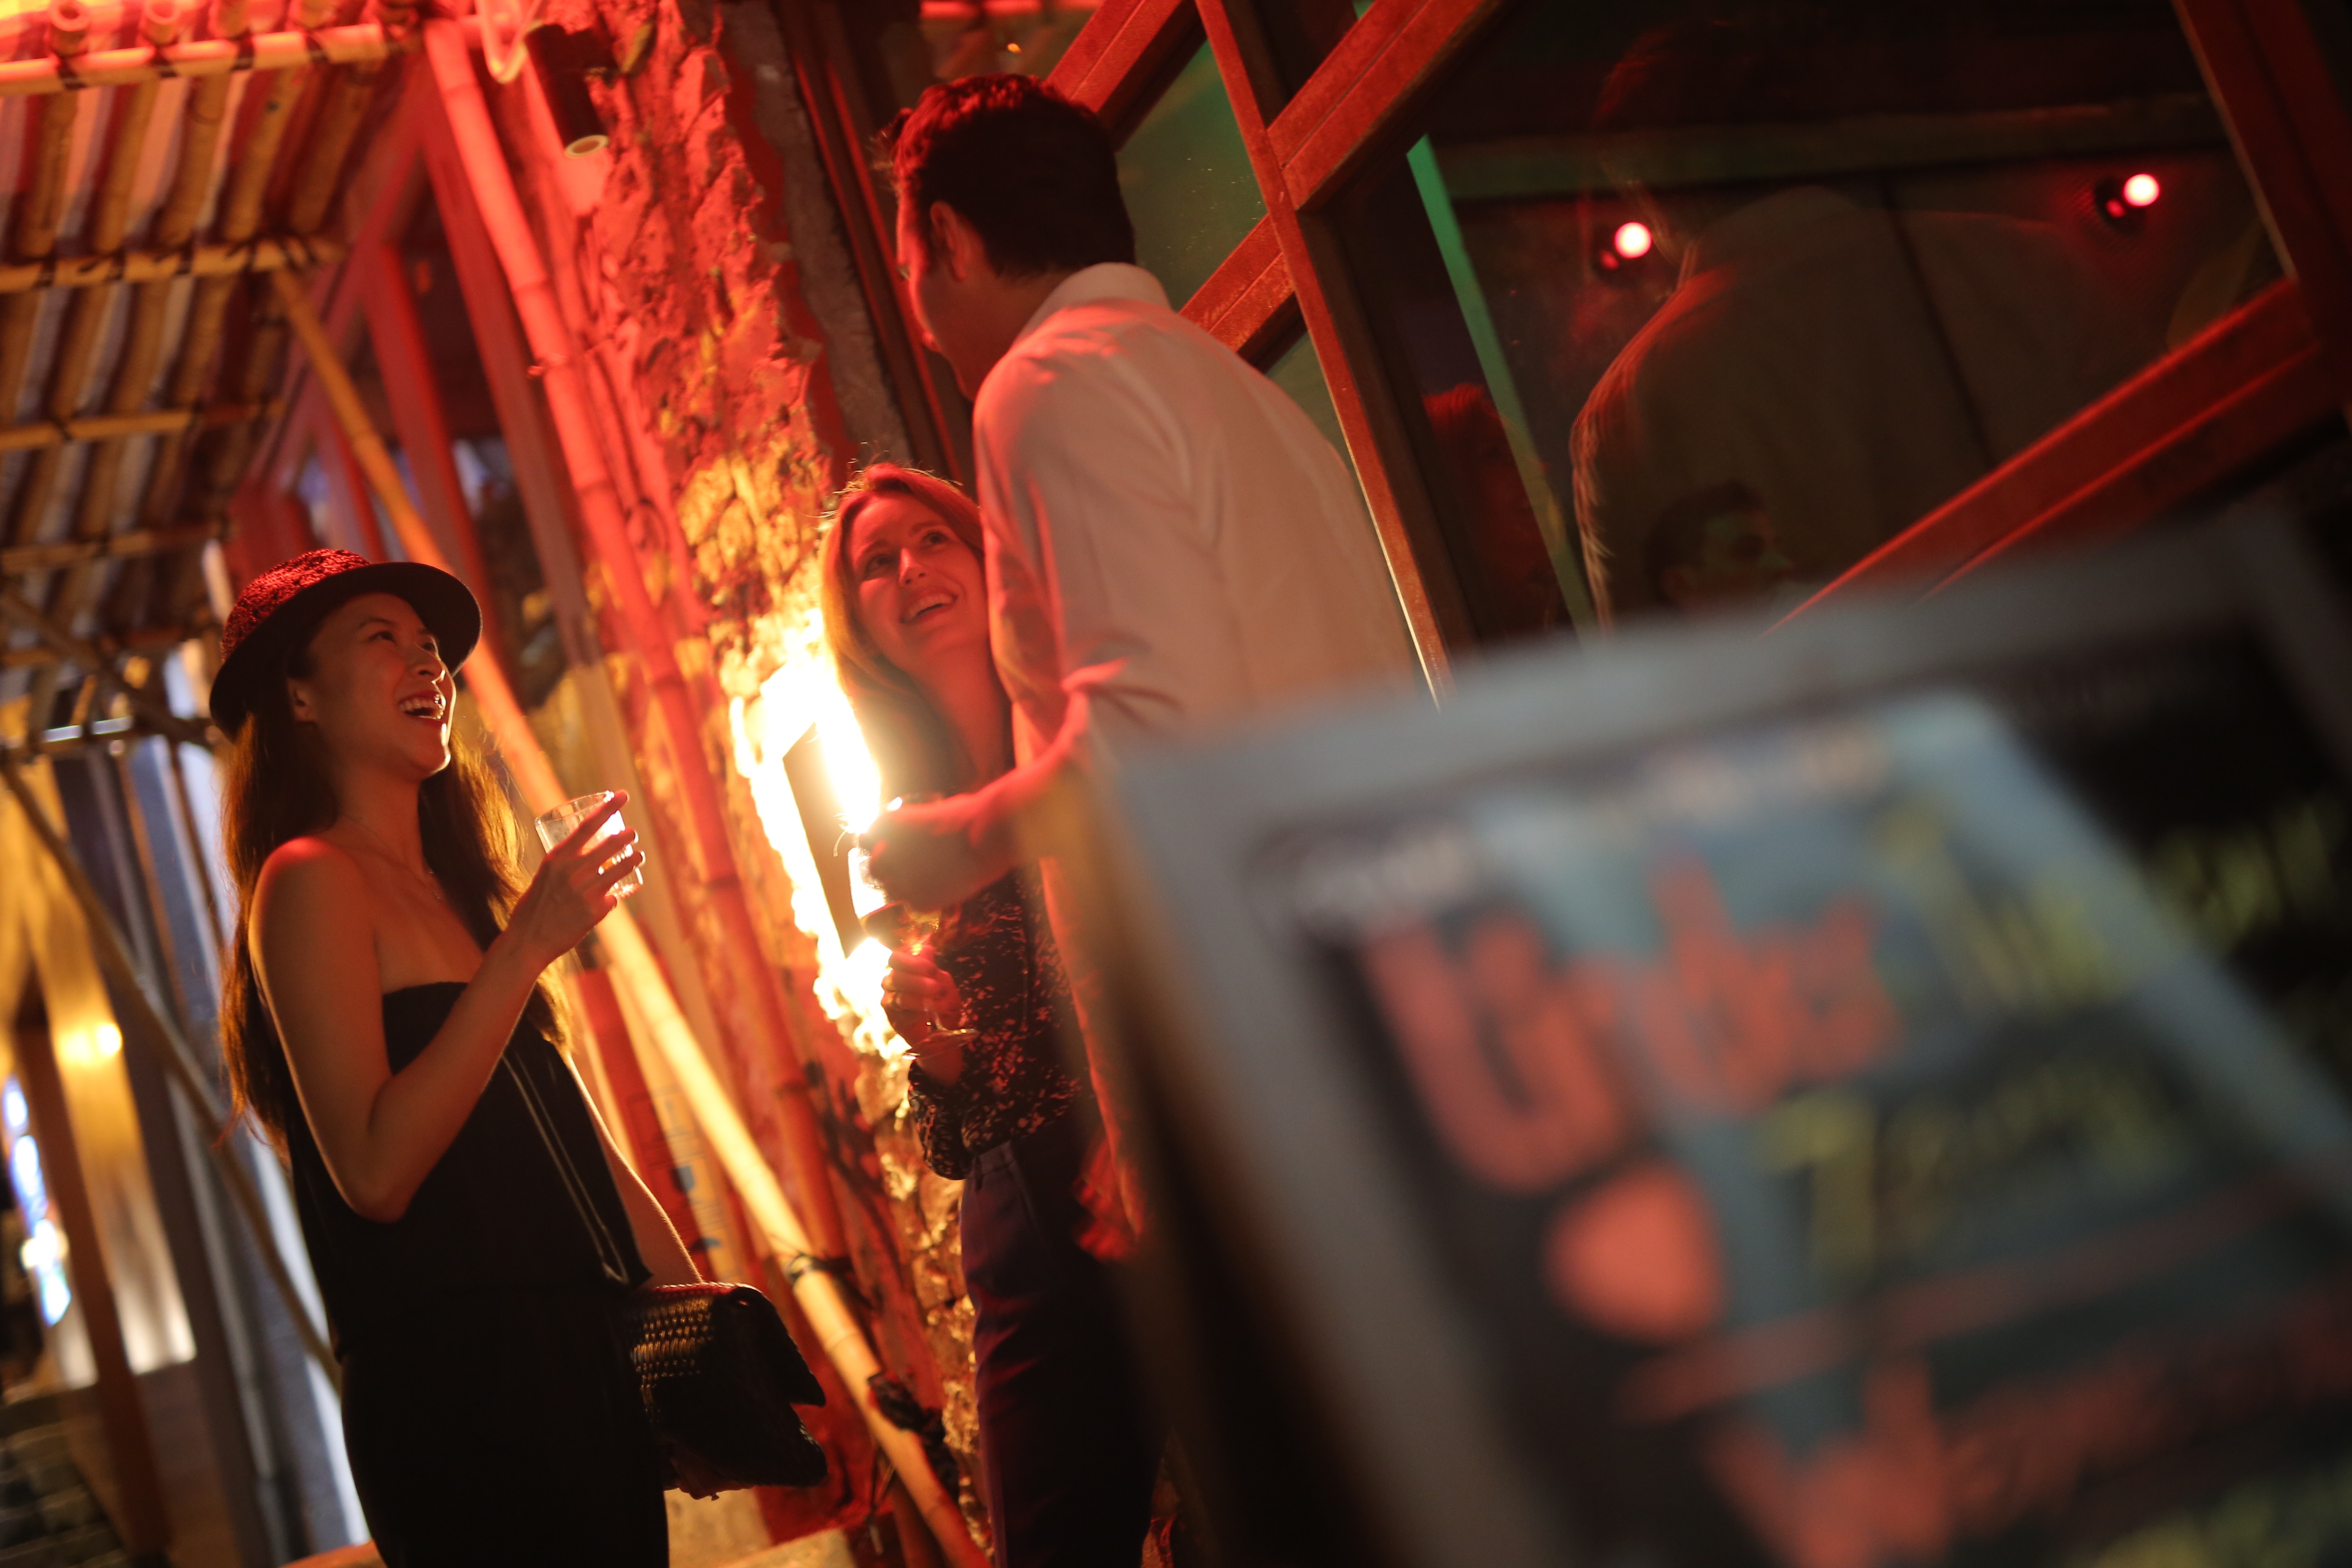 A Tinder Tuesday event at Fatty Crab in Central. Photo: Handout